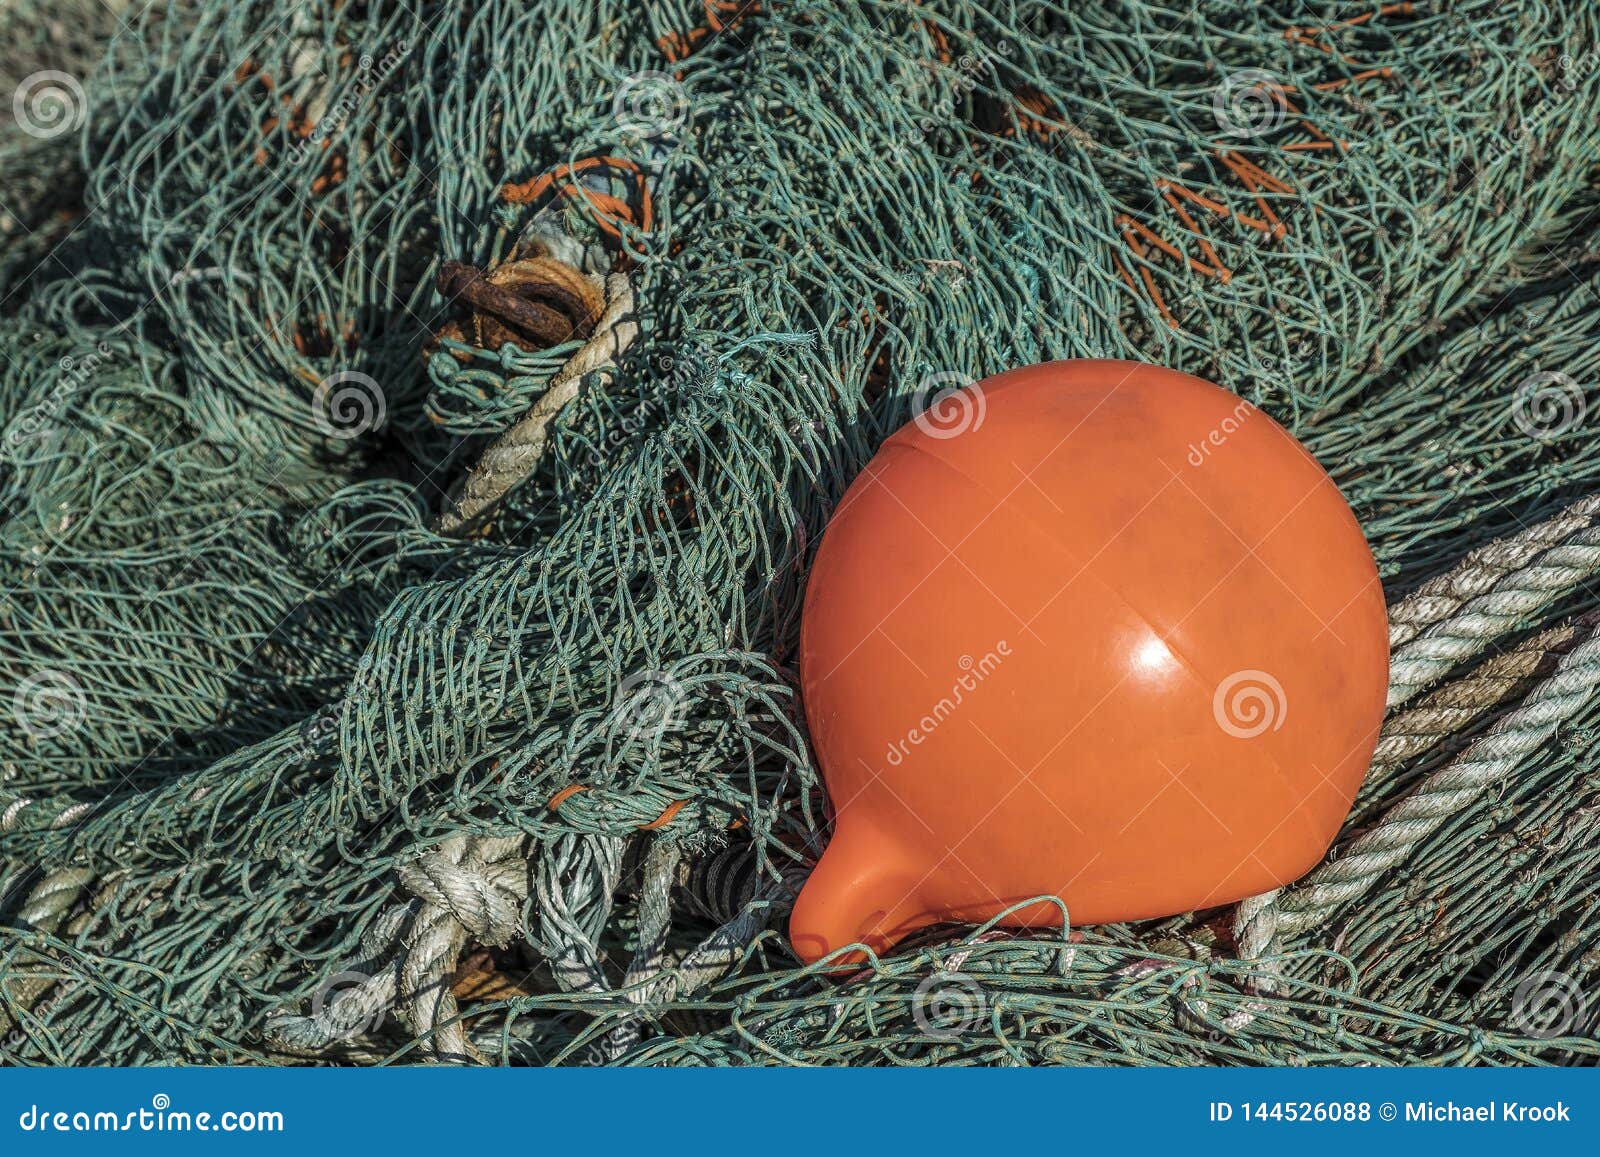 Fishing net with a buoy stock photo. Image of color - 144526088